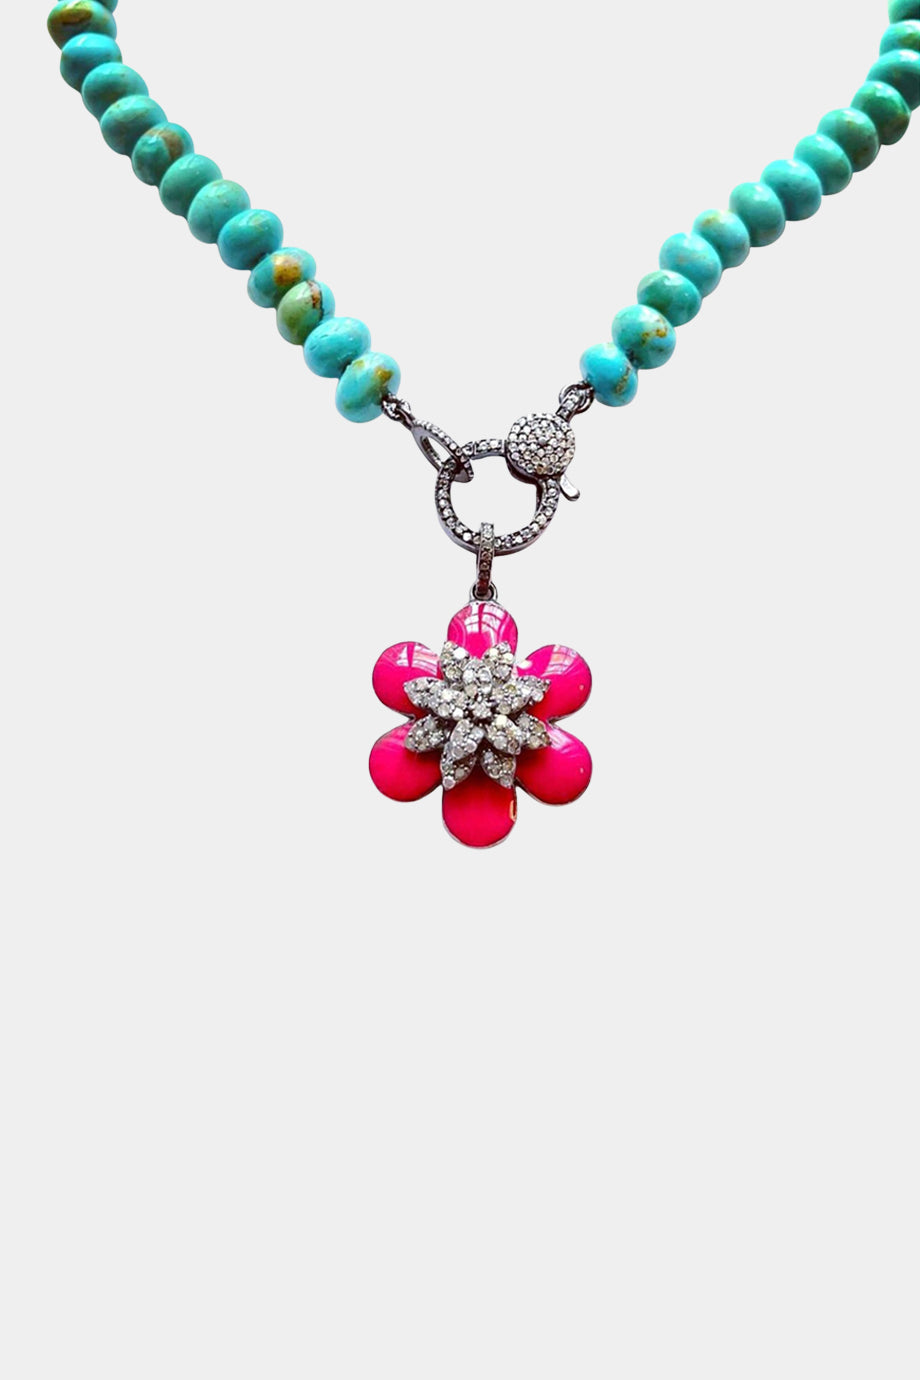 Turquoise Knotted Necklace with a Fuchsia Flower Pendant